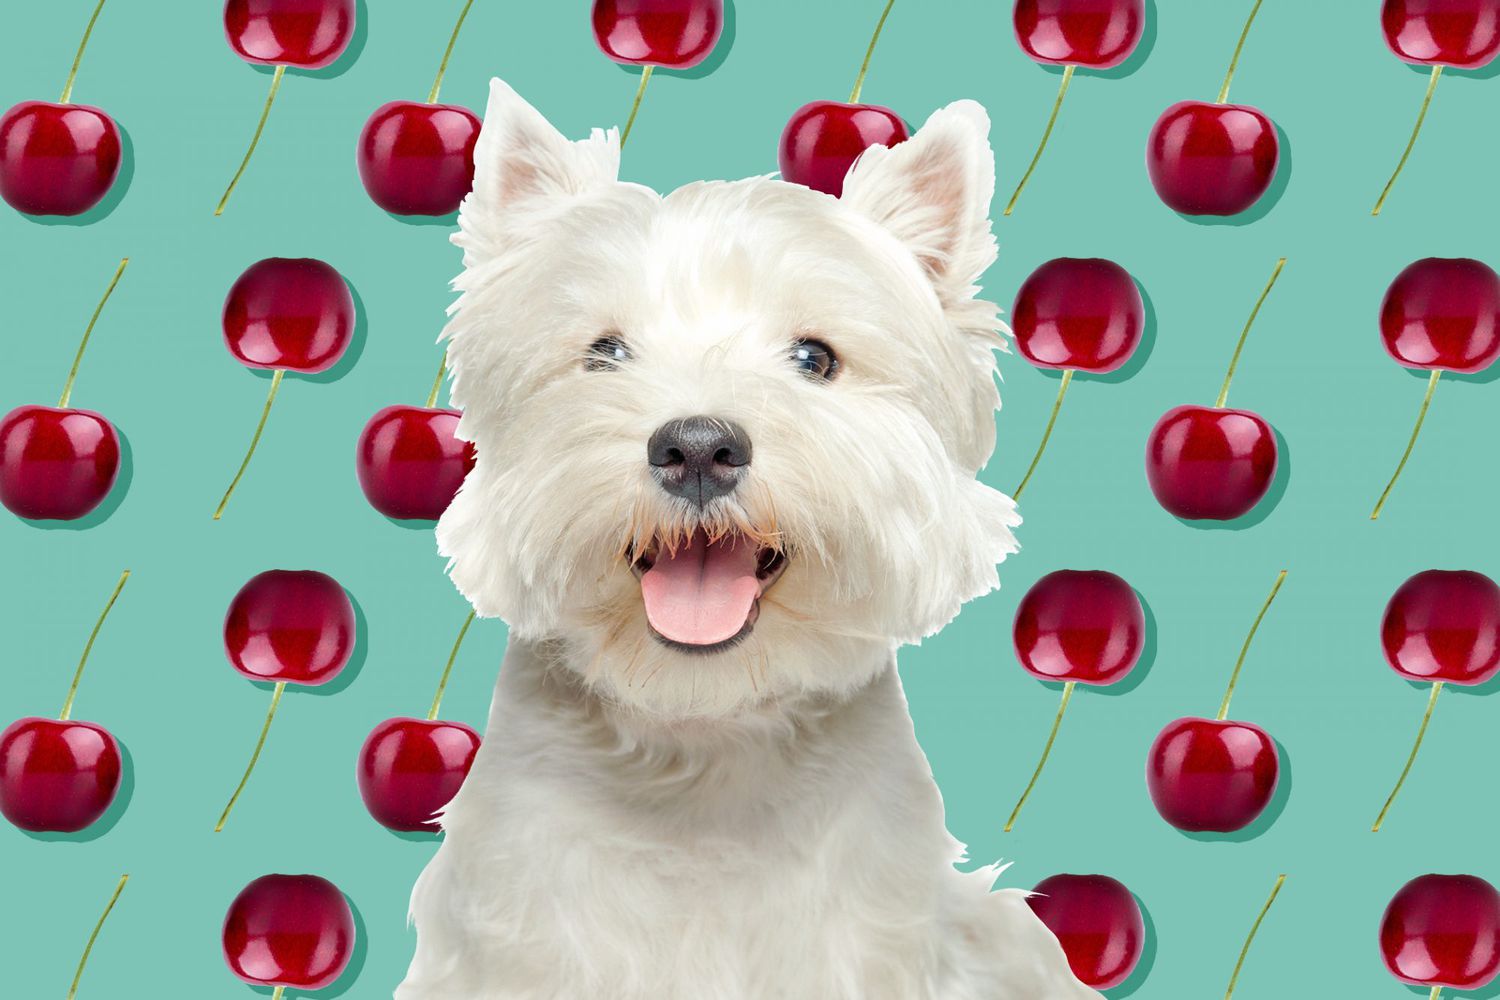 Illustration of white terrier in front of cherry background